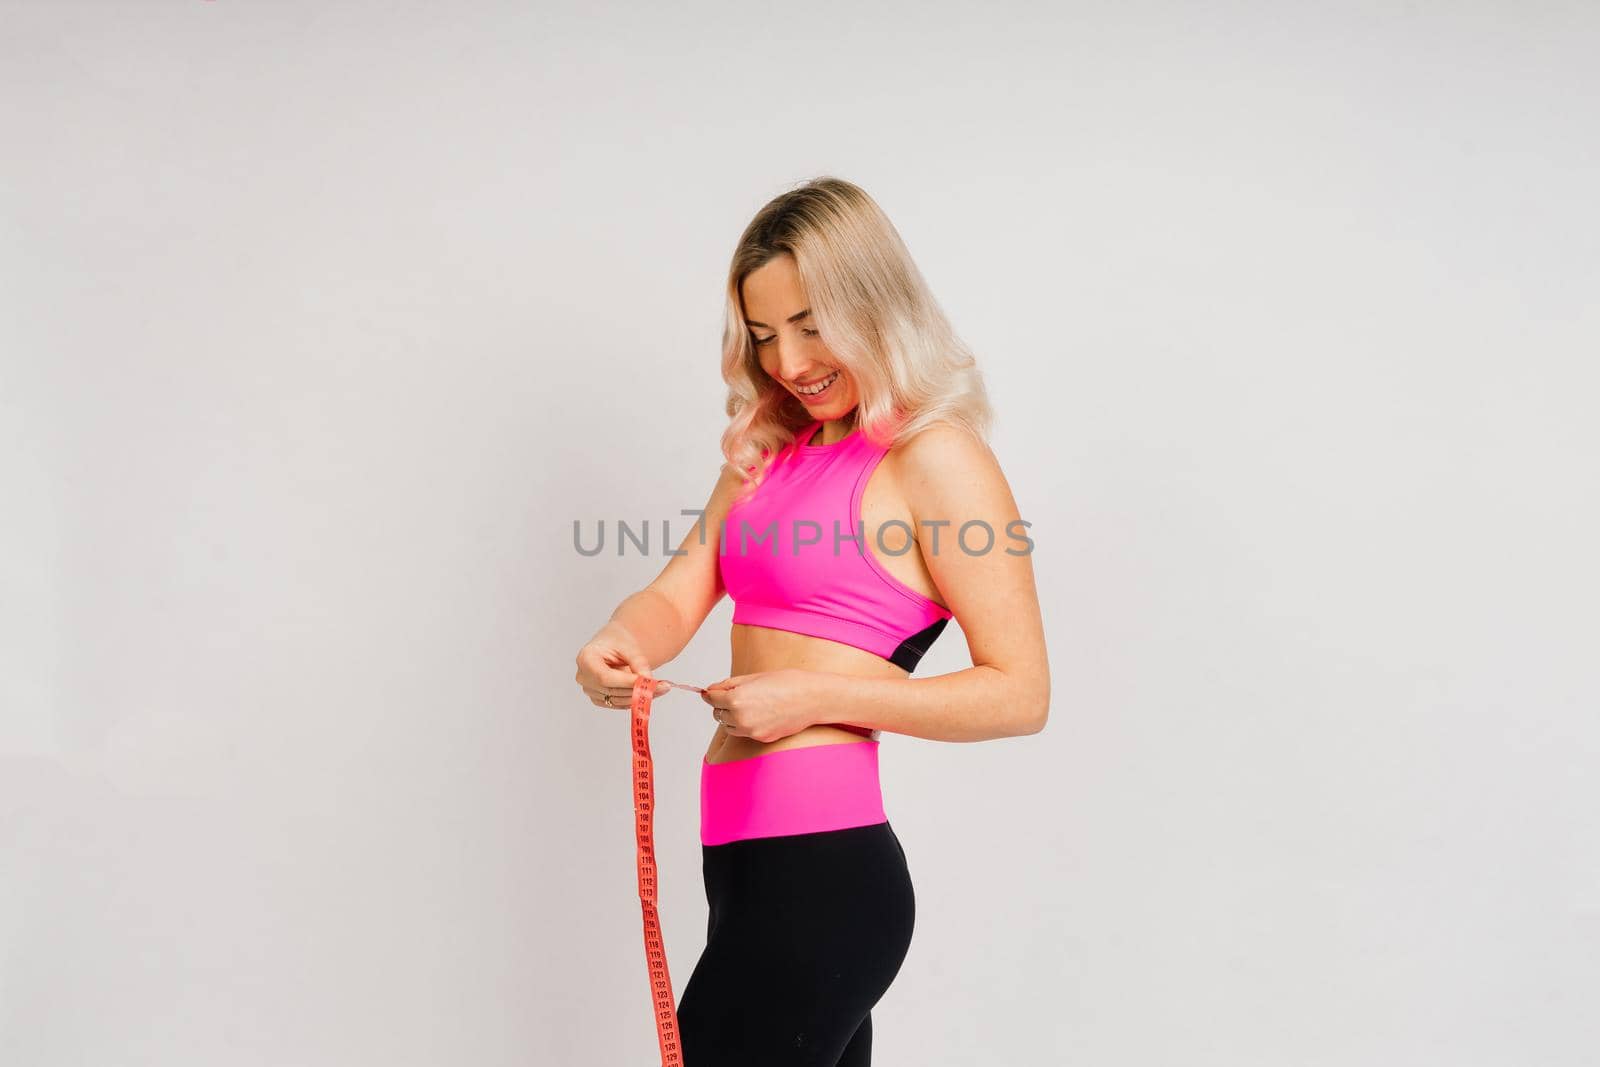 Fitness woman with tape measure showing her waist on studio background by Zelenin